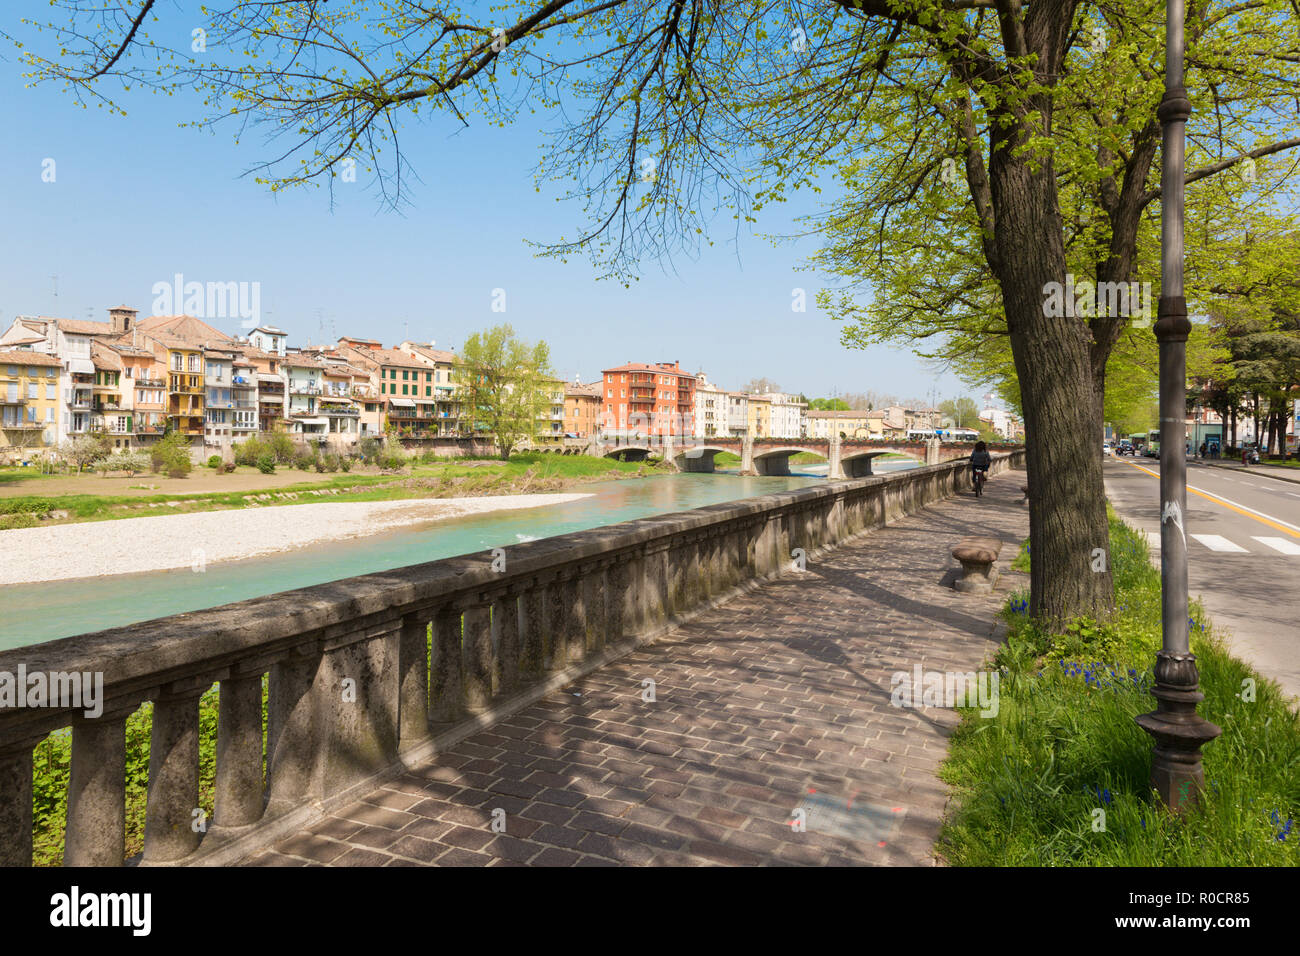 Parma - The Riverside of Parma river. Stock Photo